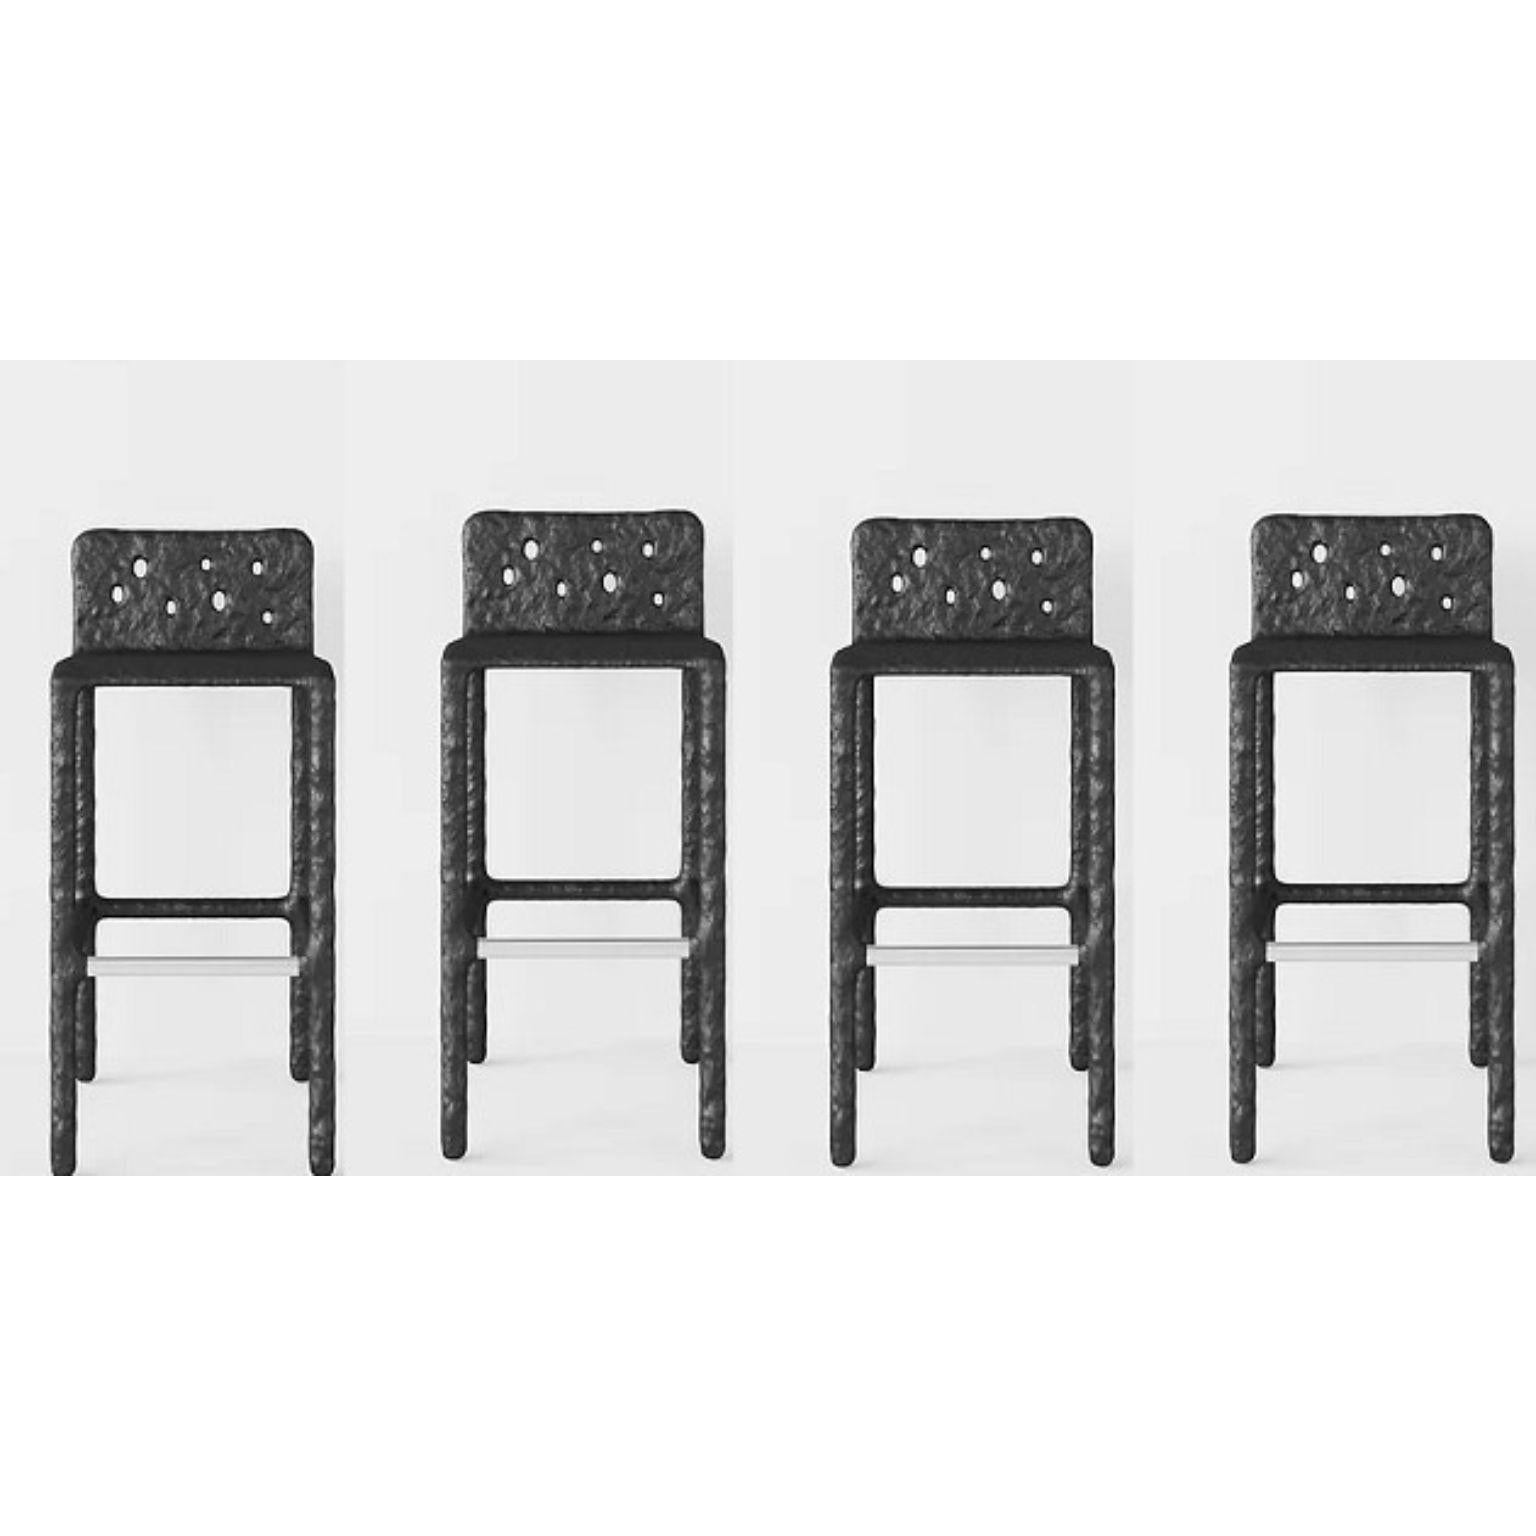 Set of 4 black sculpted contemporary chairs by Faina
Design: Victoriya Yakusha
Material: steel, flax rubber, biopolymer, cellulose
Dimensions: Height: 106 x Width: 45 x Sitting place width: 49 Legs height: 80 cm
Weight: 20 kilos.

(Also available in